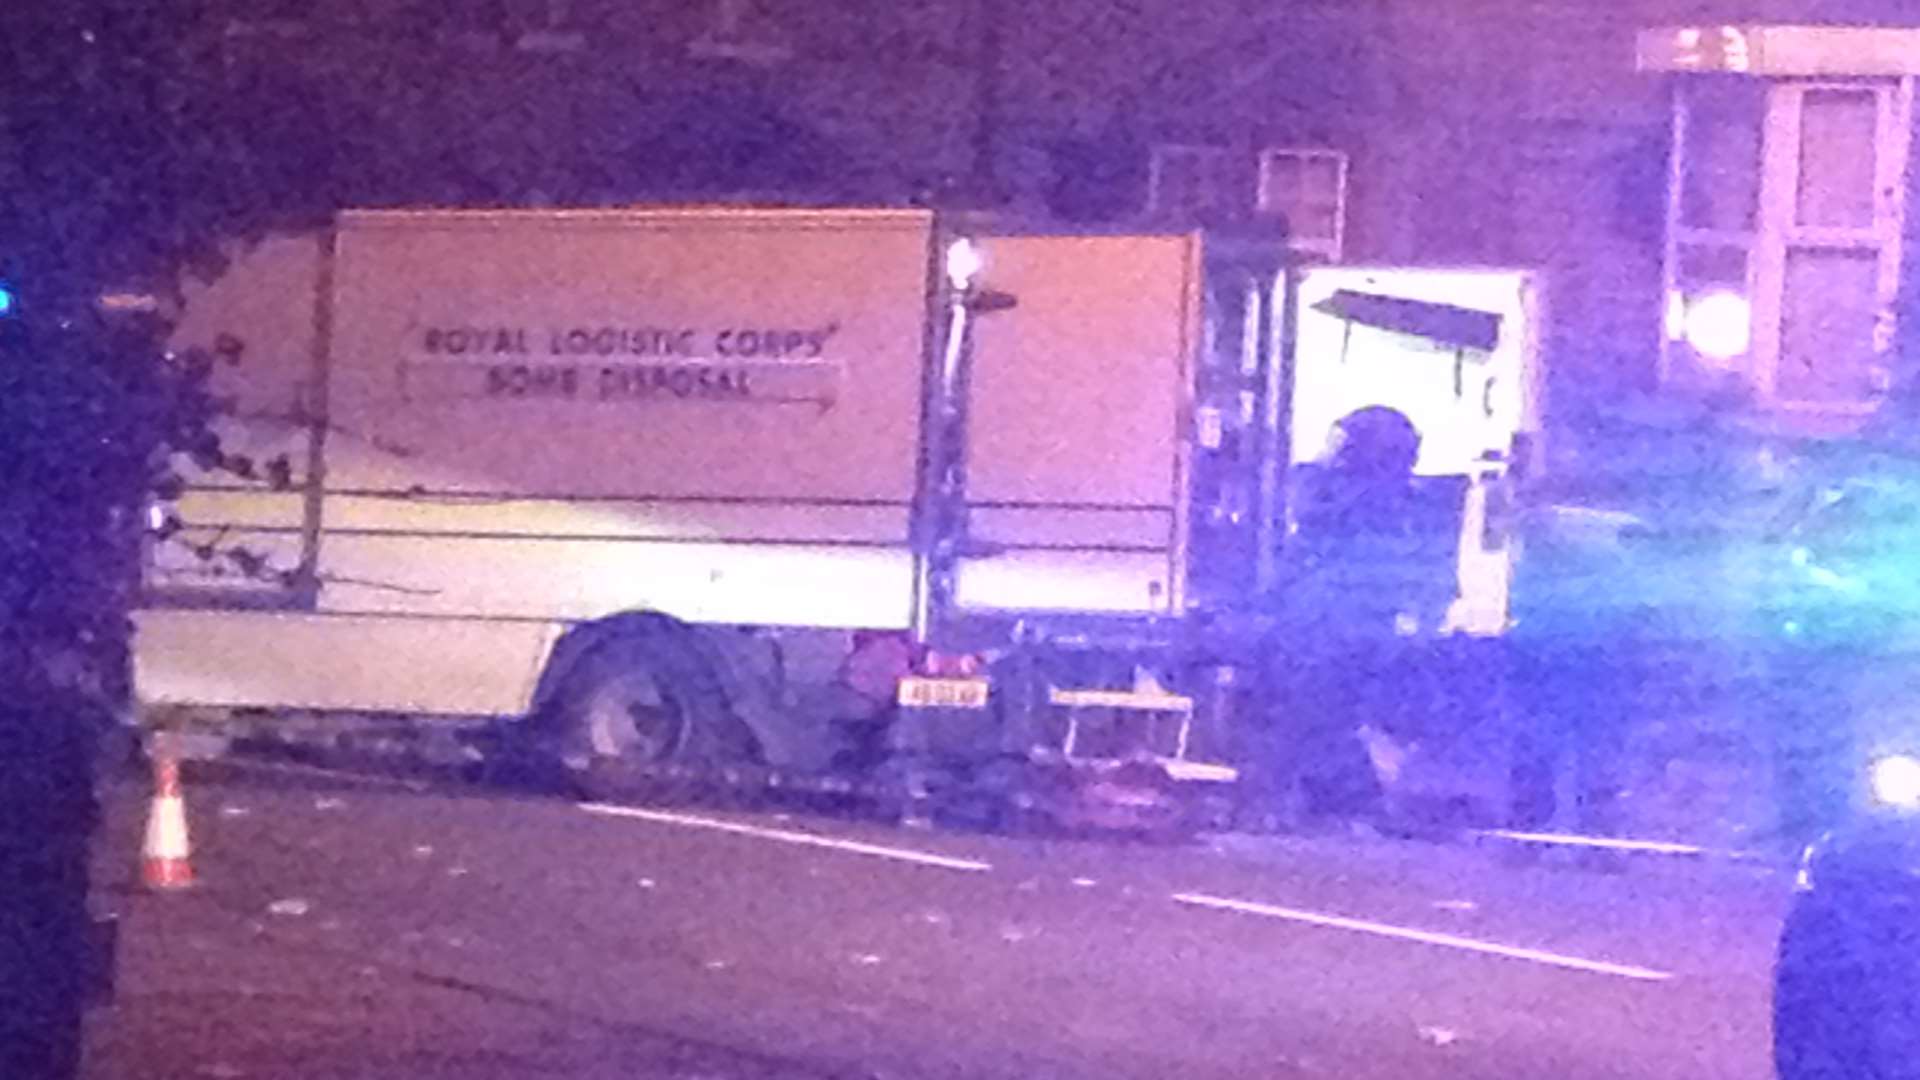 Bomb disposal teams in Maidstone's College Road